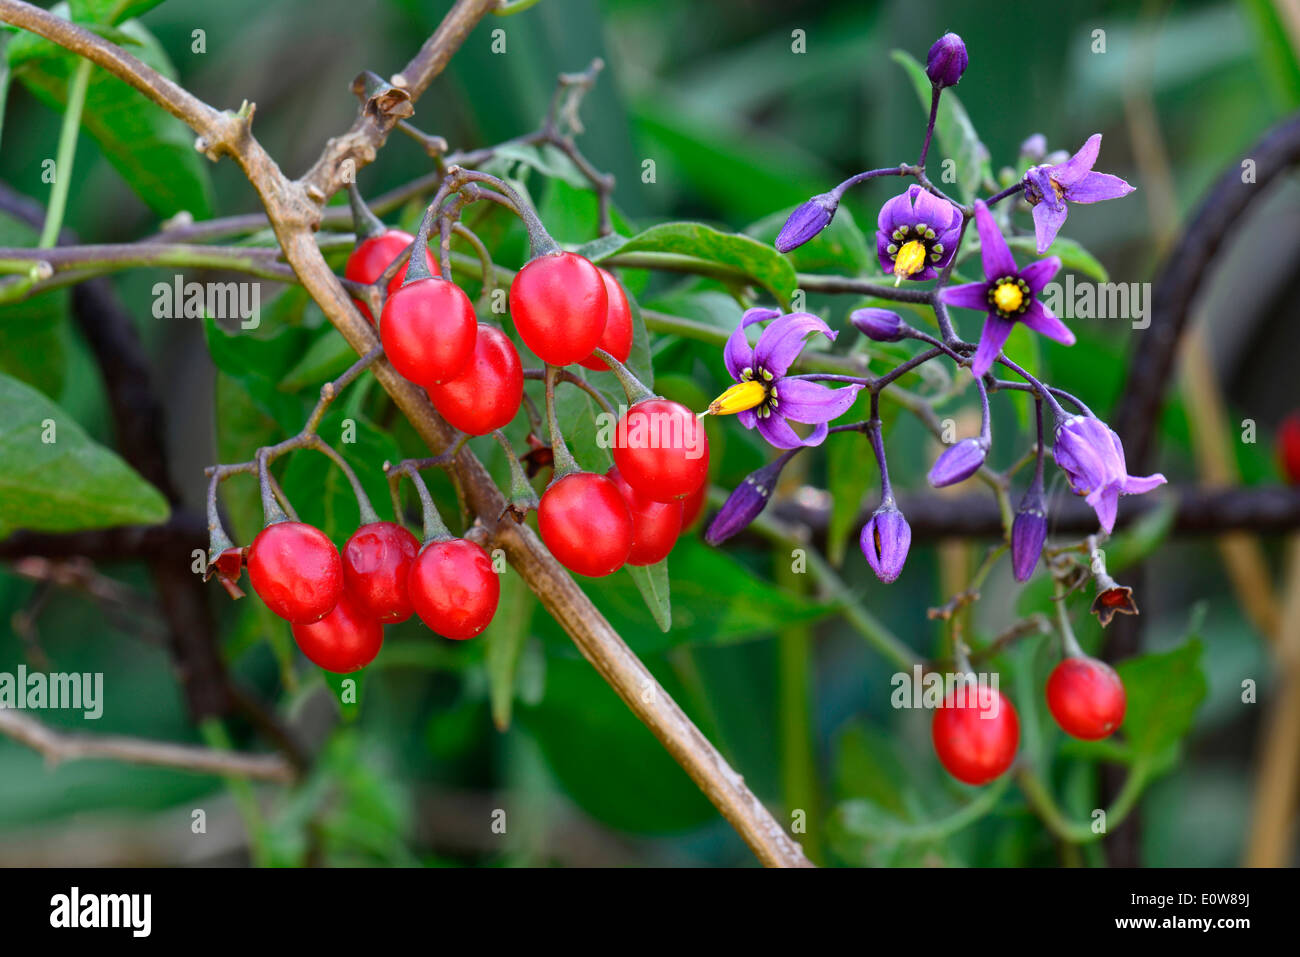 Bittersweet Nightshade, Deadly Nightshade (Solanum dulcamara), plant with ripe berries and flowers. Germany Stock Photo